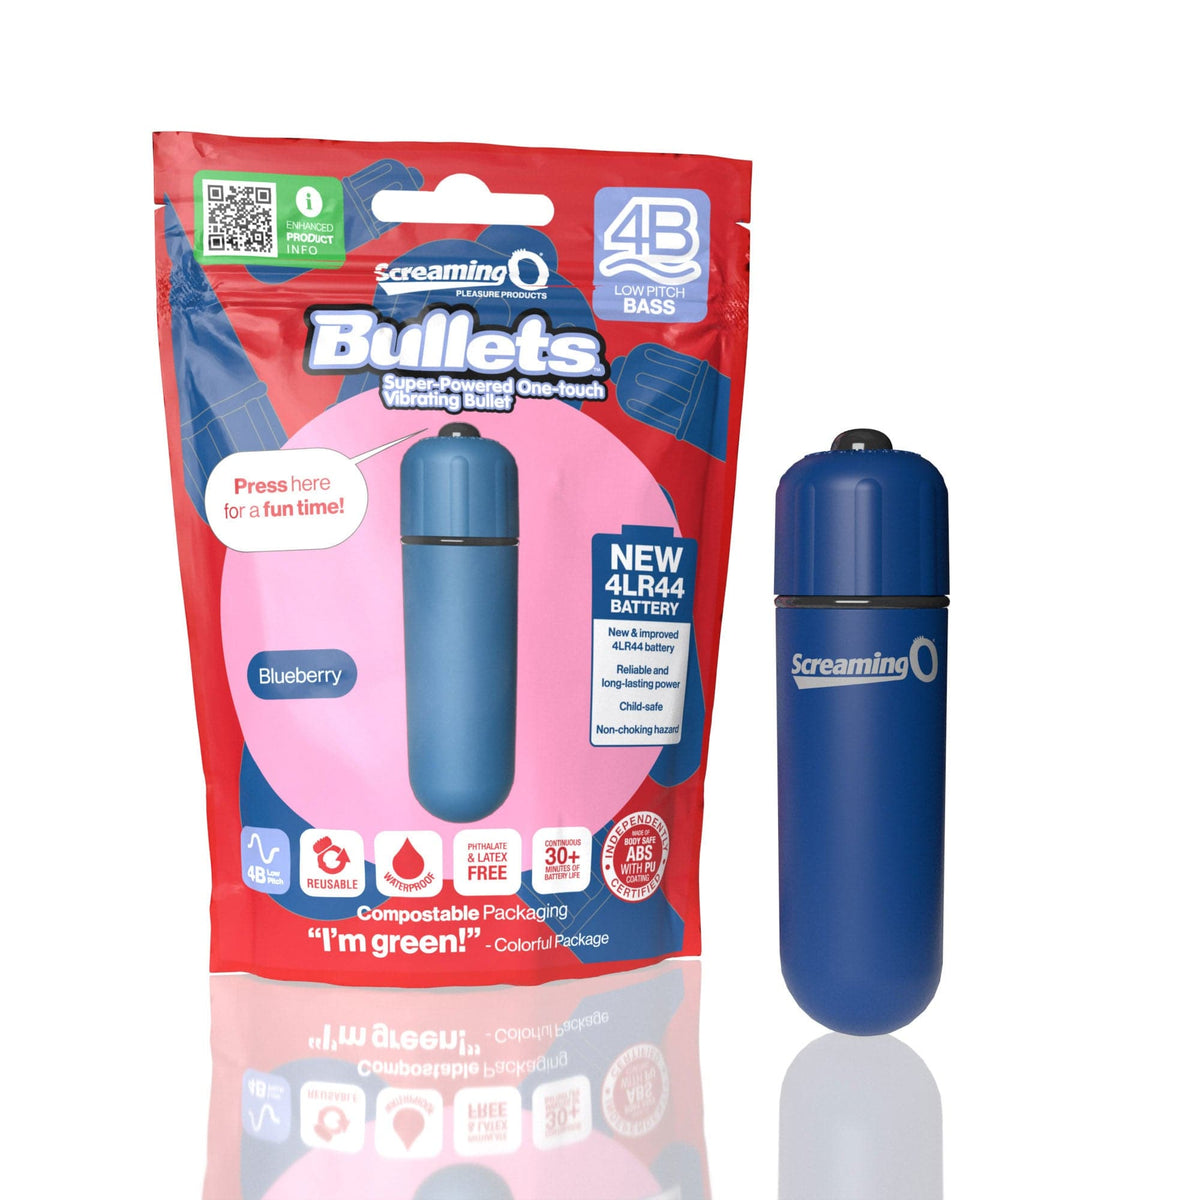 screaming o 4b bullet super powered one touch vibrating bullet blueberry